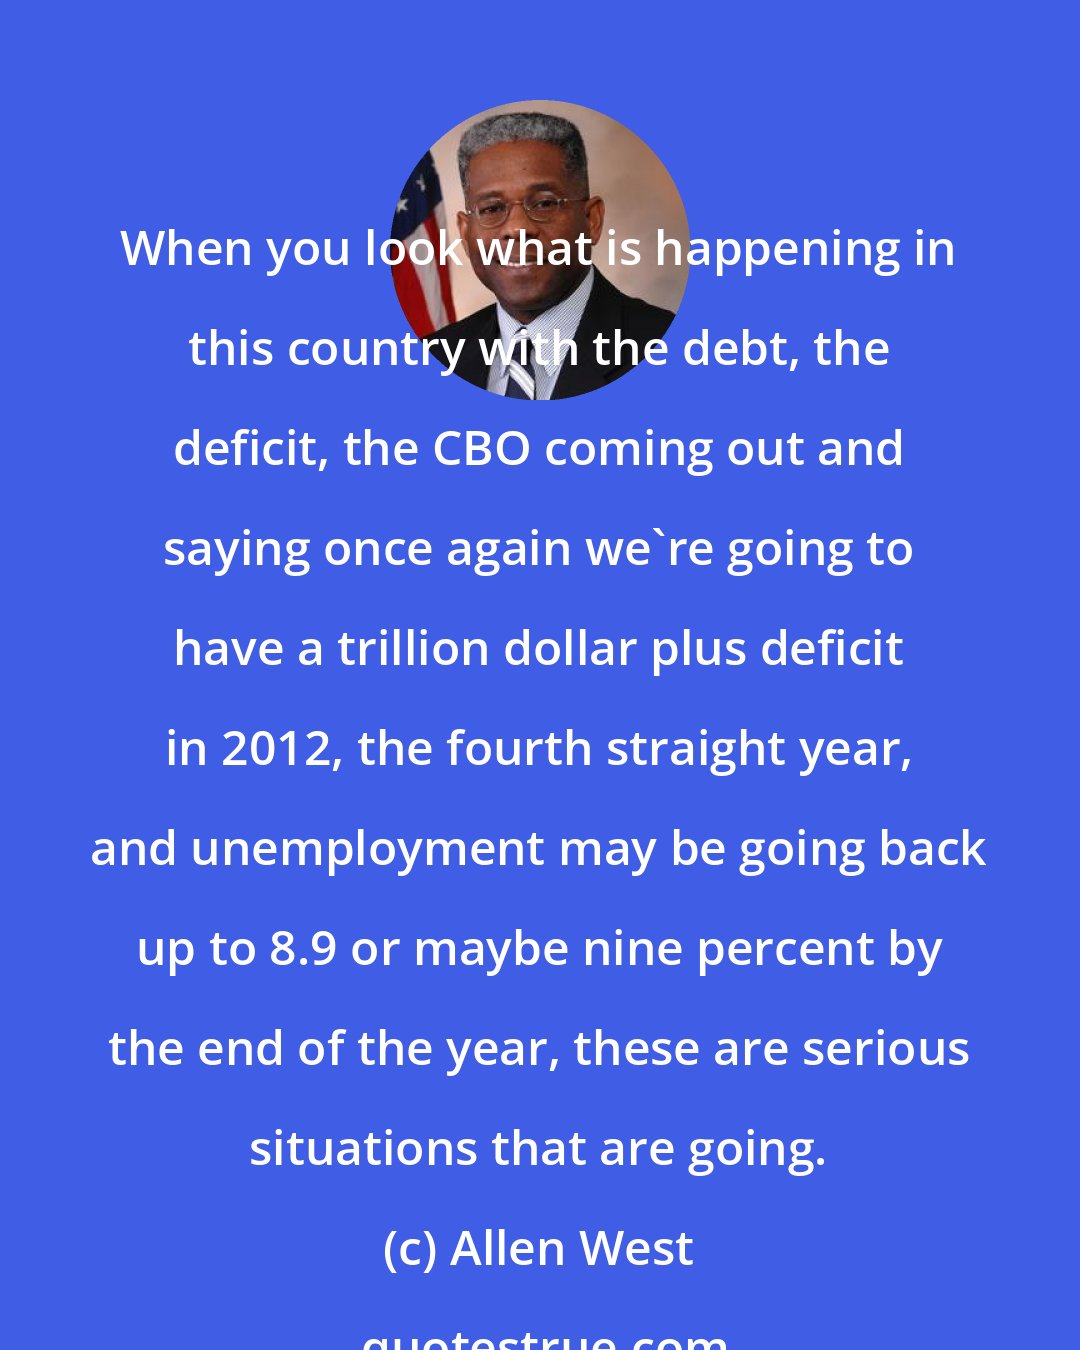 Allen West: When you look what is happening in this country with the debt, the deficit, the CBO coming out and saying once again we're going to have a trillion dollar plus deficit in 2012, the fourth straight year, and unemployment may be going back up to 8.9 or maybe nine percent by the end of the year, these are serious situations that are going.